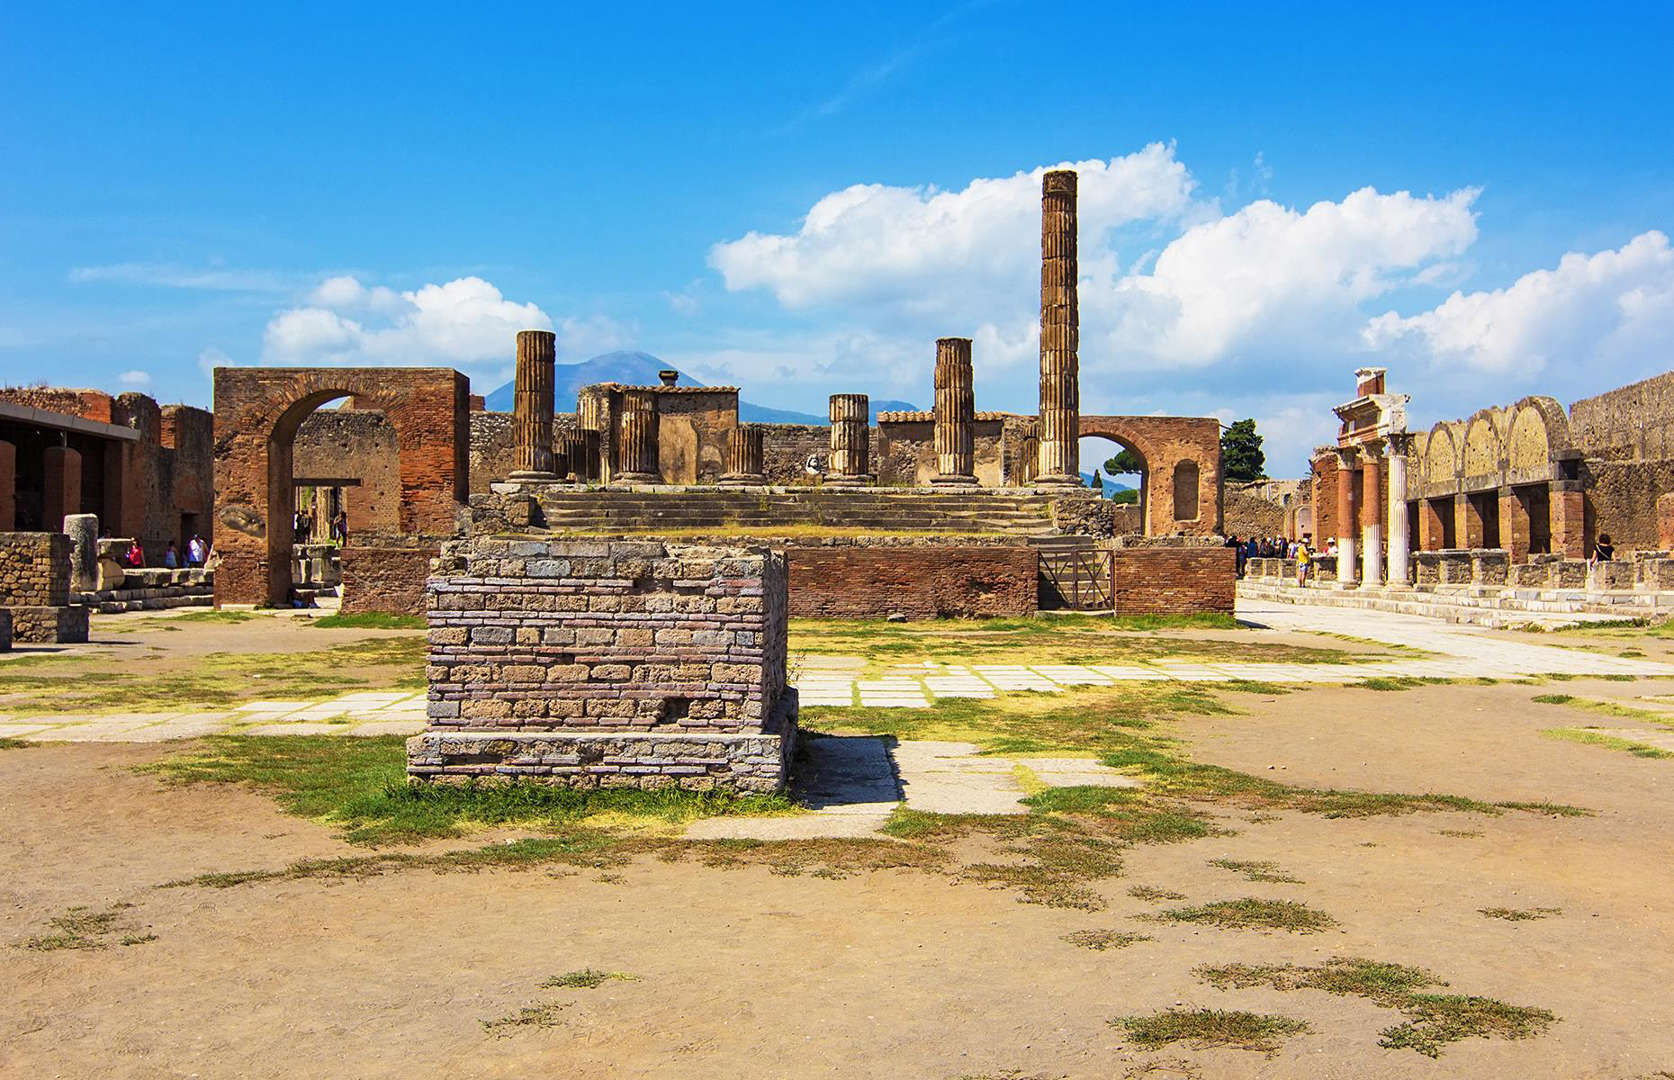 Slide 33 of 41: A similar view of Pompeii's Forum is captured here in the present day. Still the ruins are painstakingly preserved and you can spot tourists milling about the ancient remnants. Archaeological work continues to uncover more about Pompeii's residents too. From ongoing excavations, experts have been able to reveal everything from their political ideals to their lunch choices... Take a look at more amazing lost cities rediscovered